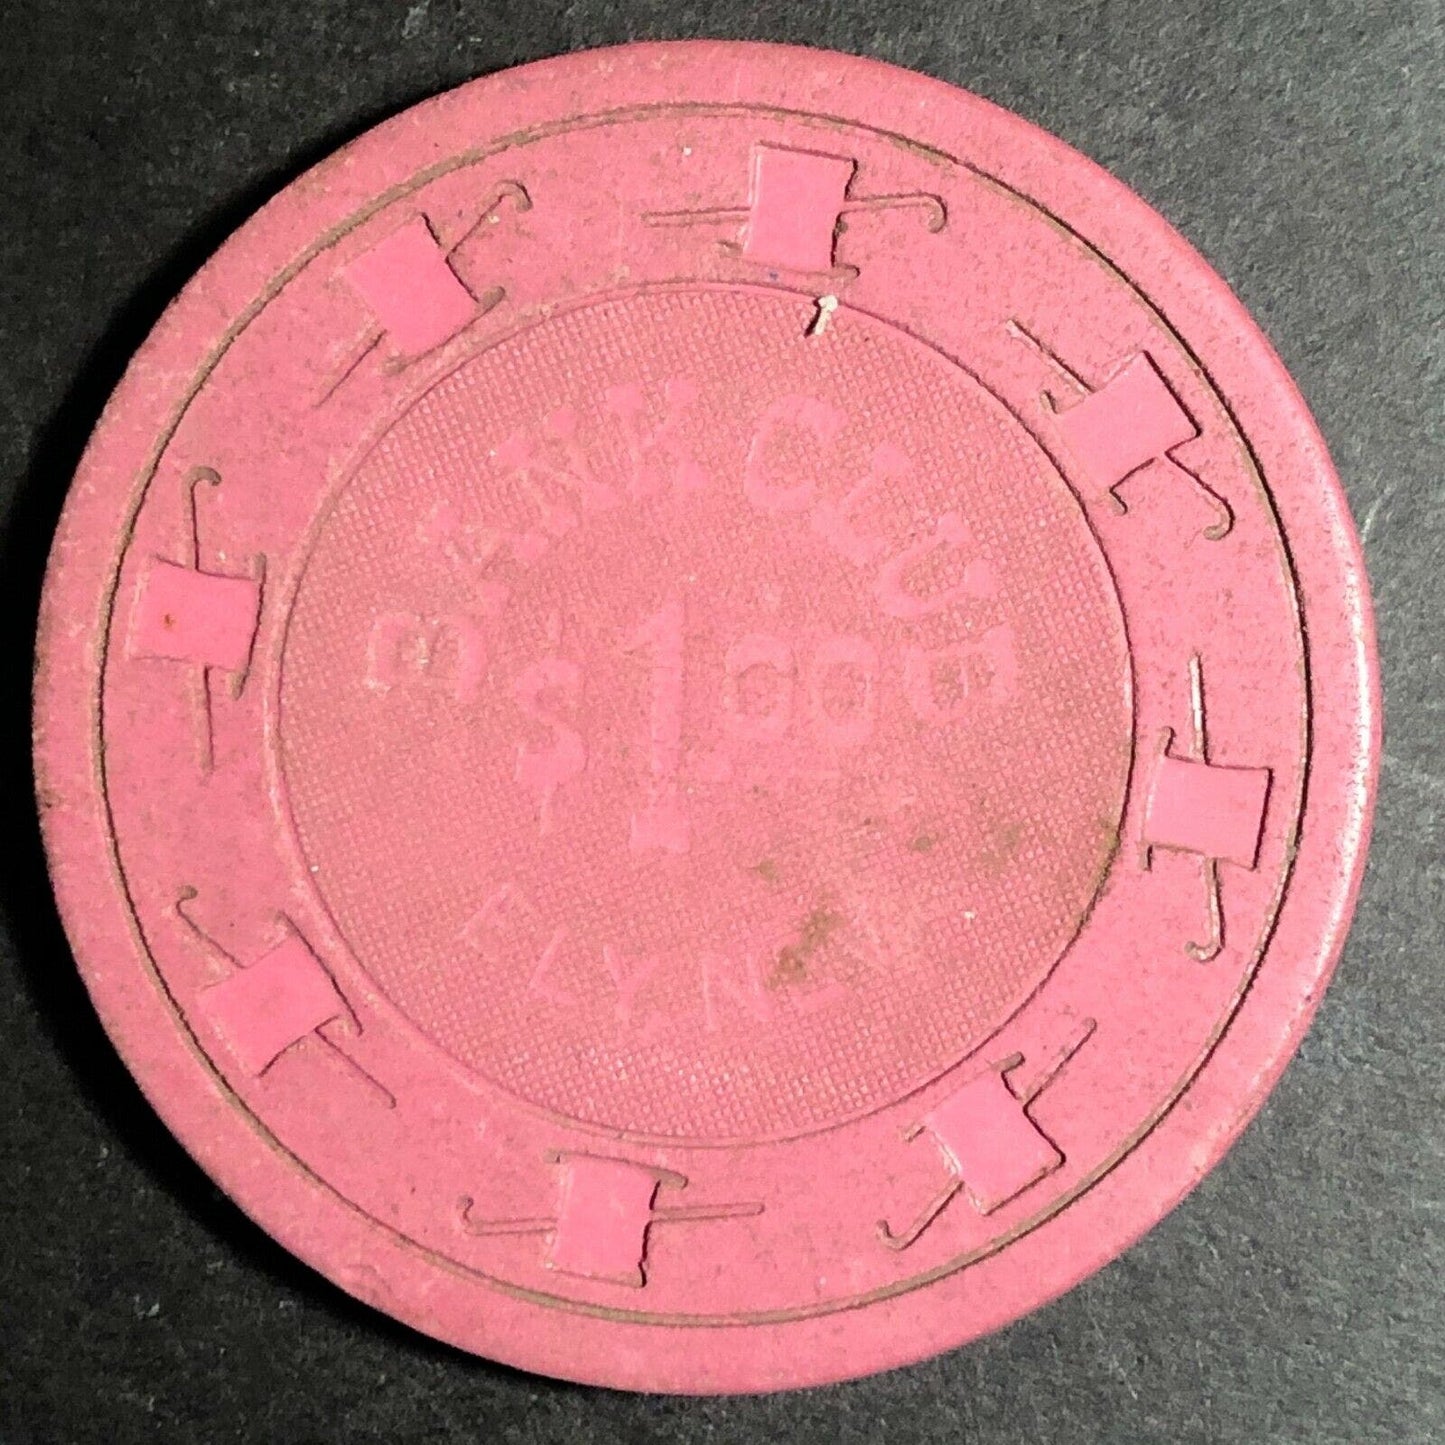 Vintage Clay Casino $1 Chip - Bank Club - Ely, NV